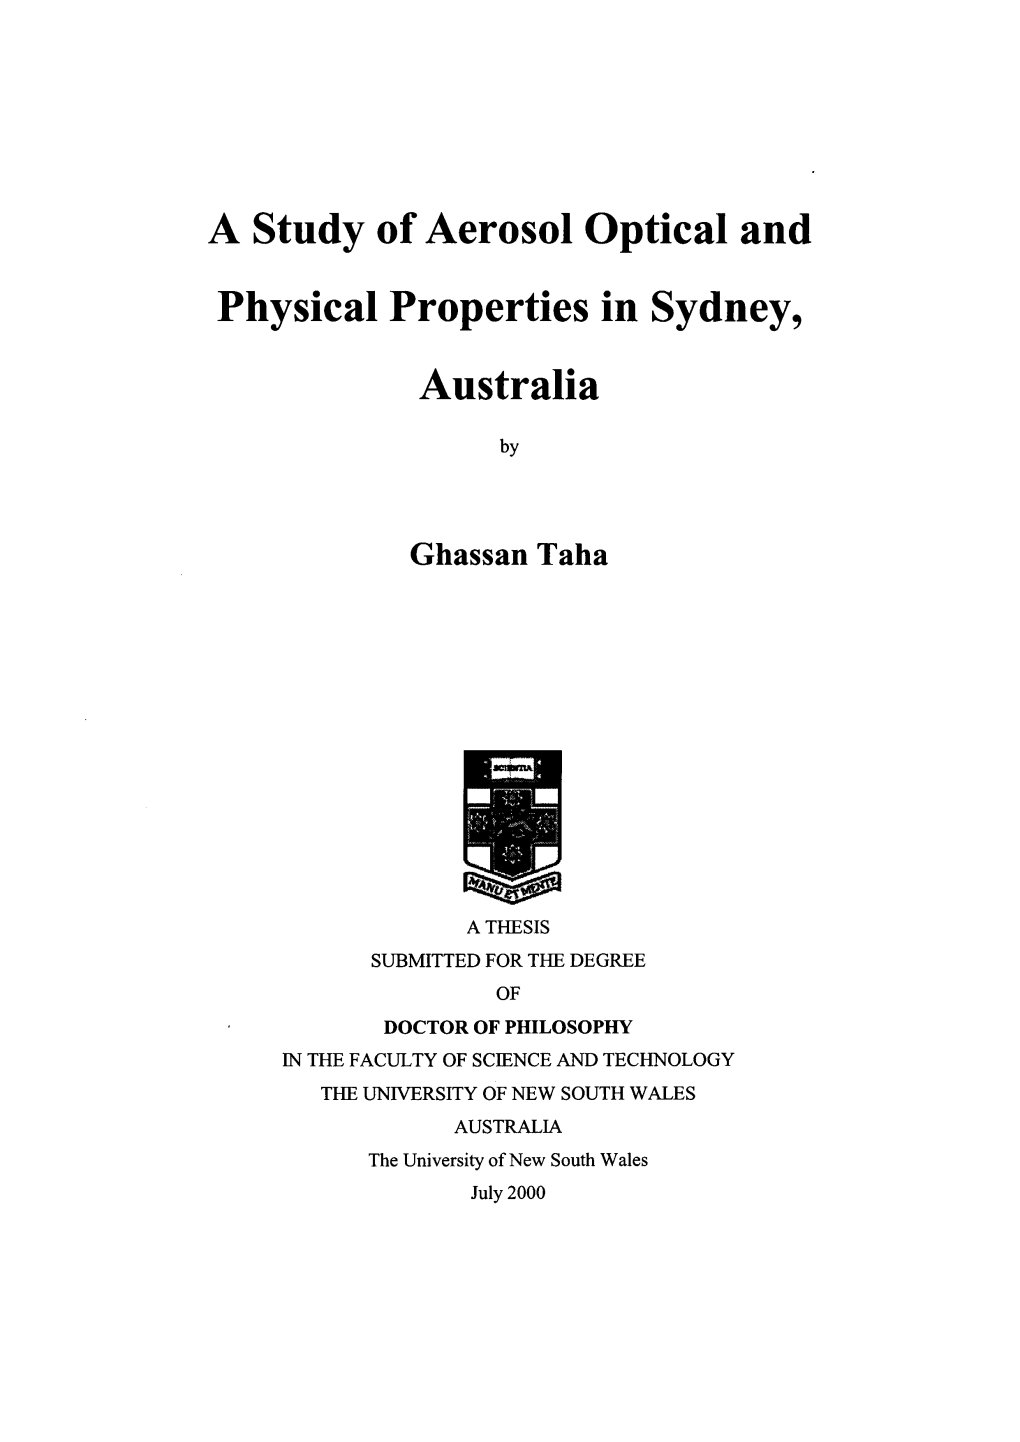 A Study of Aerosol Optical and Physical Properties in Sydney, Australia